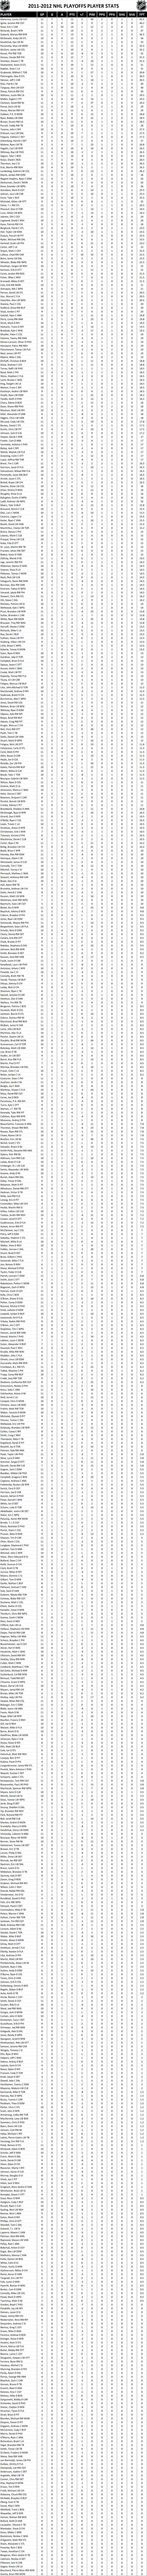 2011-2012 National Hockey League Pool Playoff Player Stats